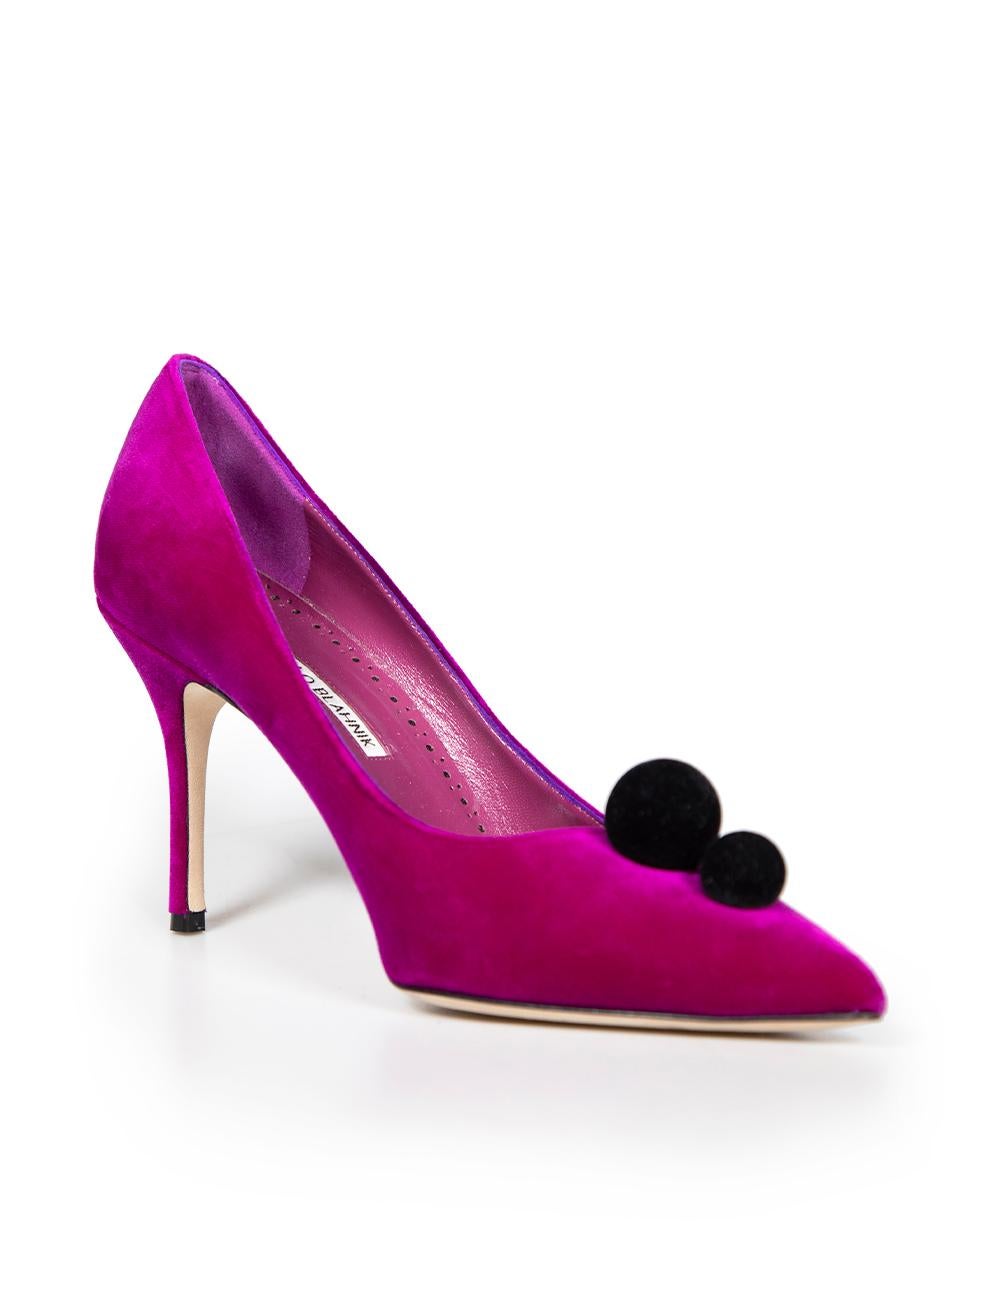 CONDITION is Very good. Hardly any visible wear to shoes is evident on this used Manolo Blahnik designer resale item. These shoes come with original dust bag.
 
 
 
 Details
 
 
 Model: Piera 90
 
 Purple
 
 Velvet
 
 Pumps
 
 Point toe
 
 High